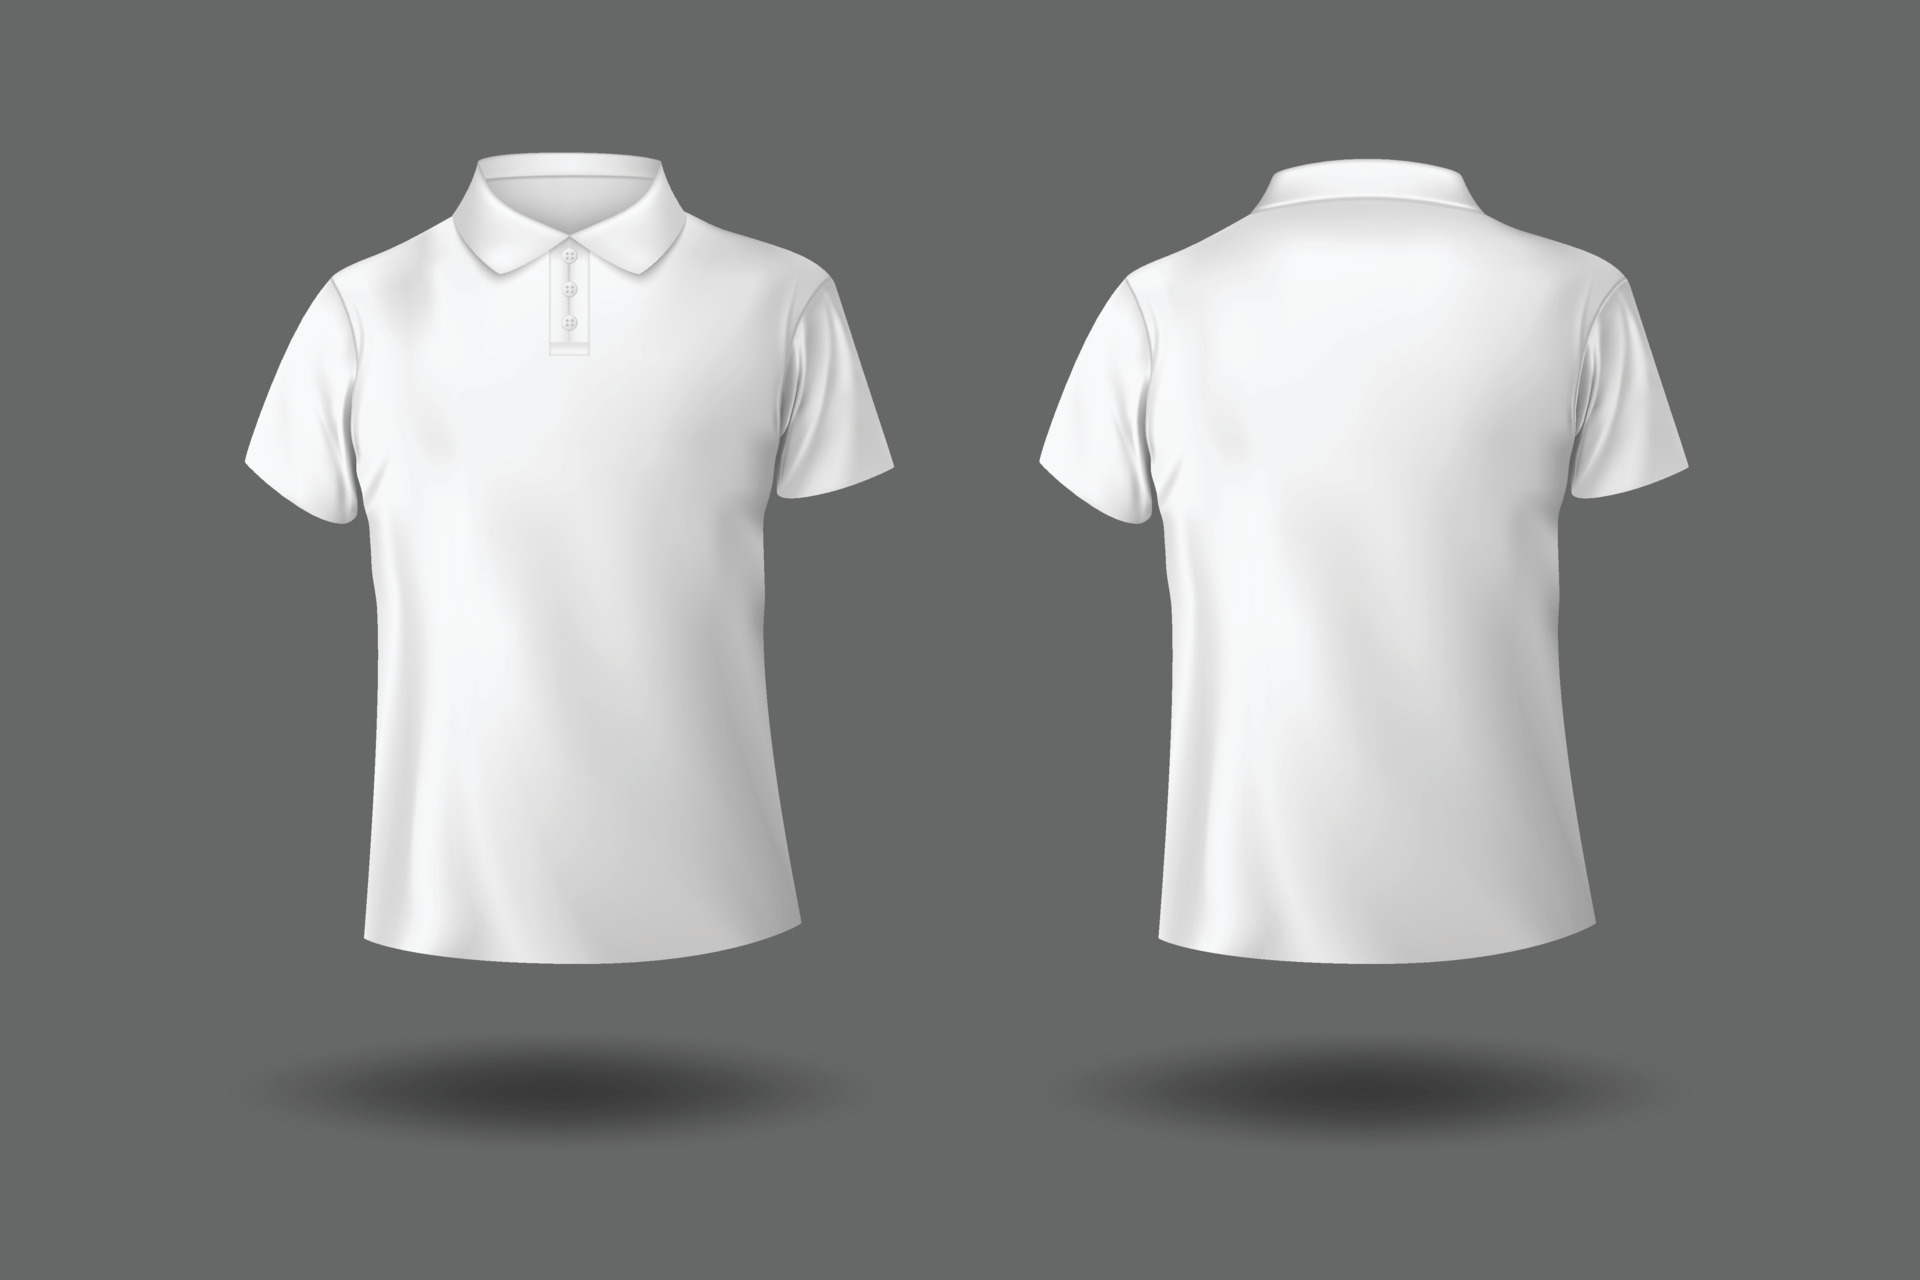 fortov Mose blanding White Polo Shirt Vector Art, Icons, and Graphics for Free Download